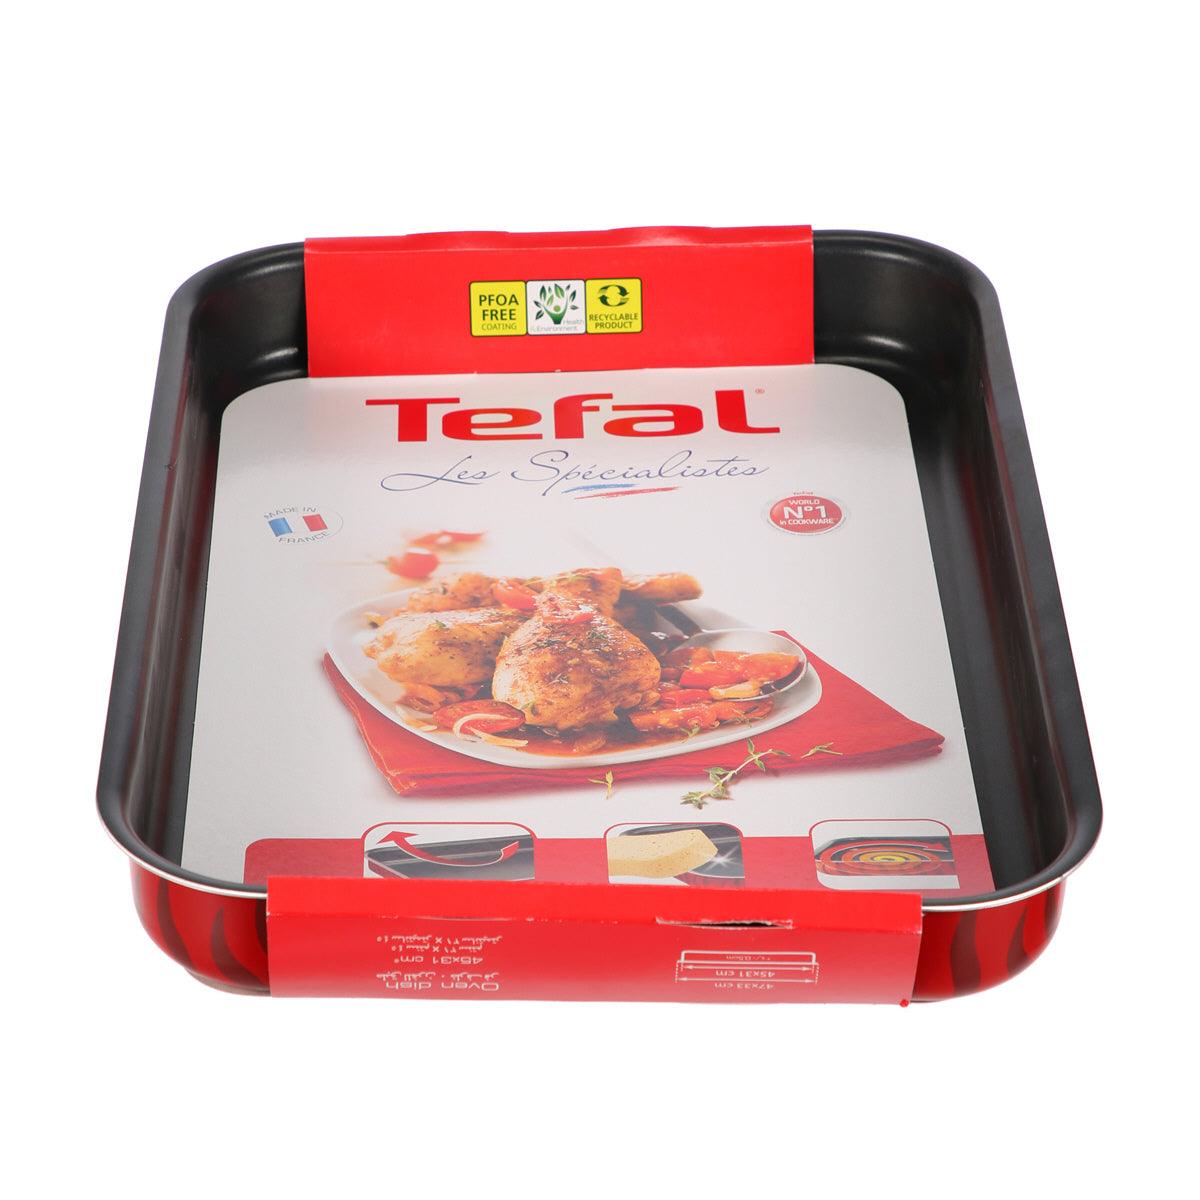 Tefal Les Specialistes Rectangular Oven Dish 45 x 31 cm / J1325082 - Karout Online -Karout Online Shopping In lebanon - Karout Express Delivery 